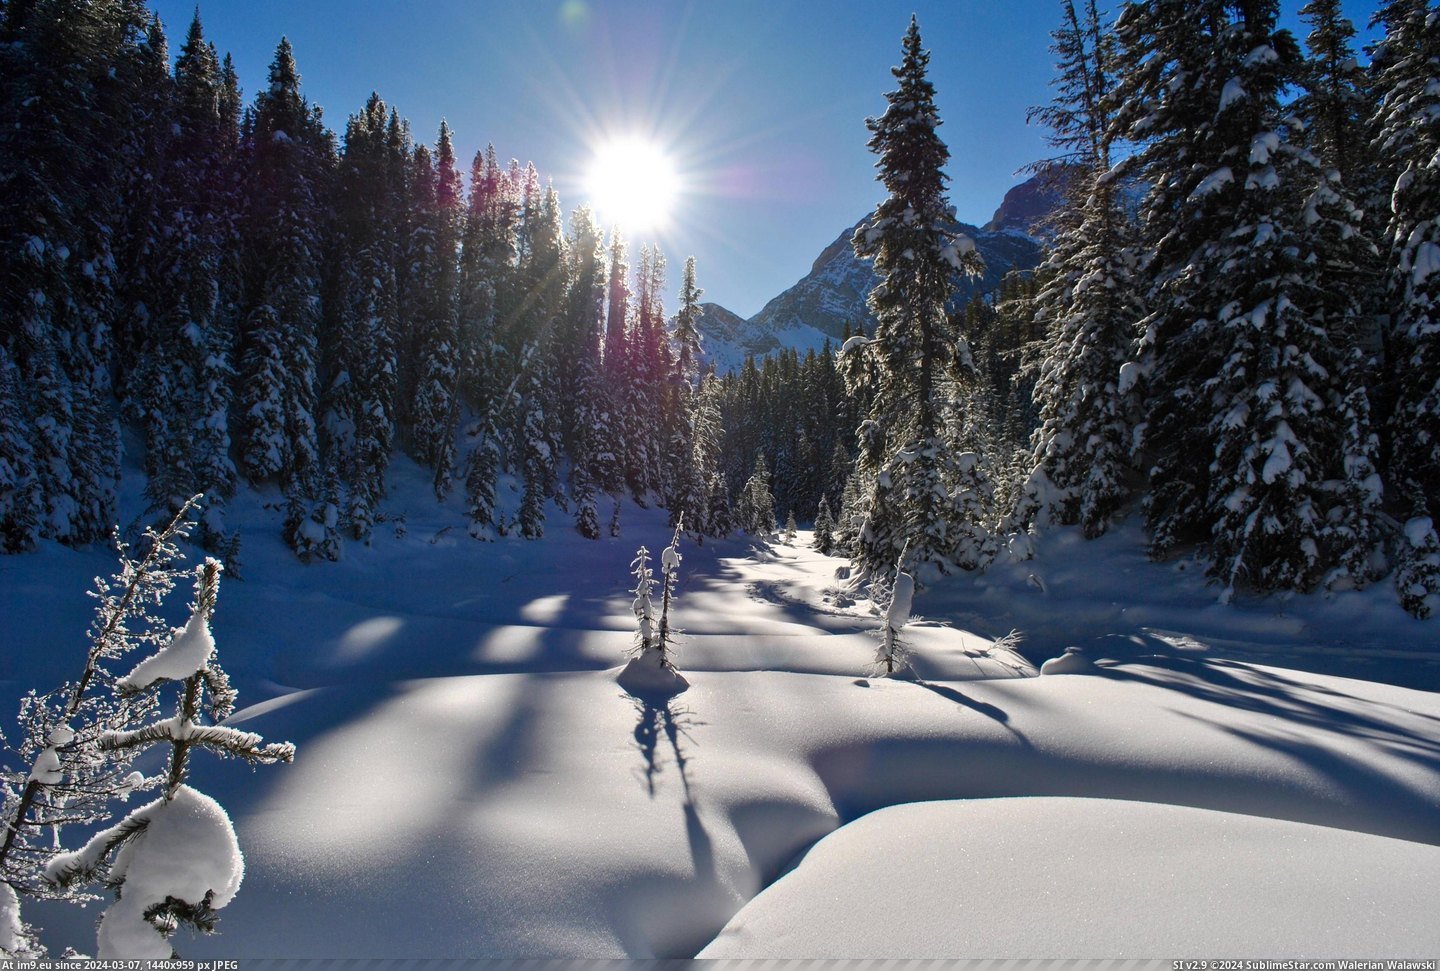 #Day #Canada #Winter #Mid #3872x2592 #Kananaskis #Country #Dead #Sun [Earthporn] Mid- day sun in the dead of winter - Kananaskis Country, AB (Canada) - [3872x2592] Pic. (Obraz z album My r/EARTHPORN favs))